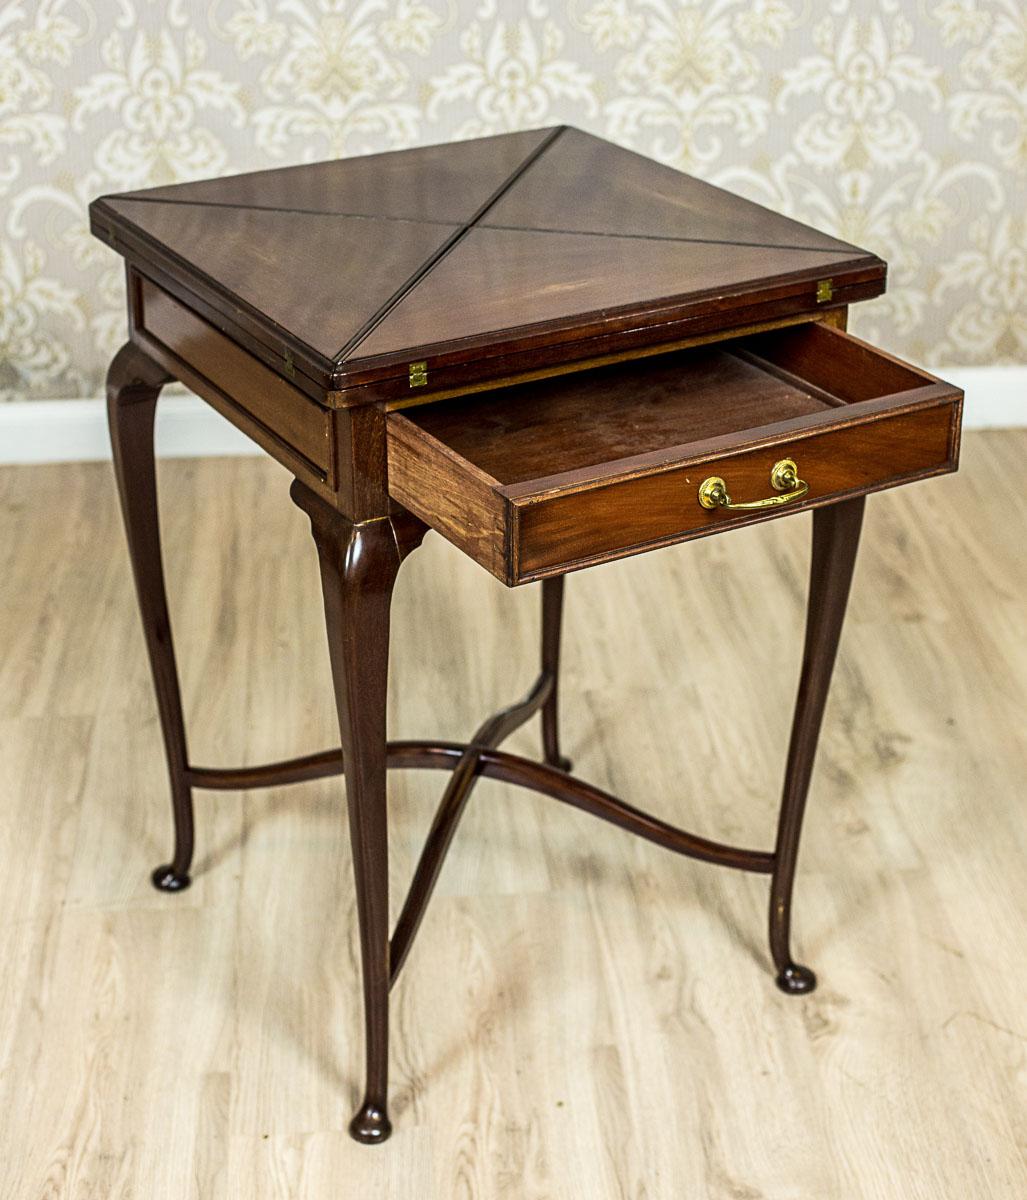 We present you this English card table, circa 1870.
This table is on bentwood legs that are joint together with a cross bar with slightly prominent knees.
There is a single drawer on the apron.
The closed table top is composed of four connecting